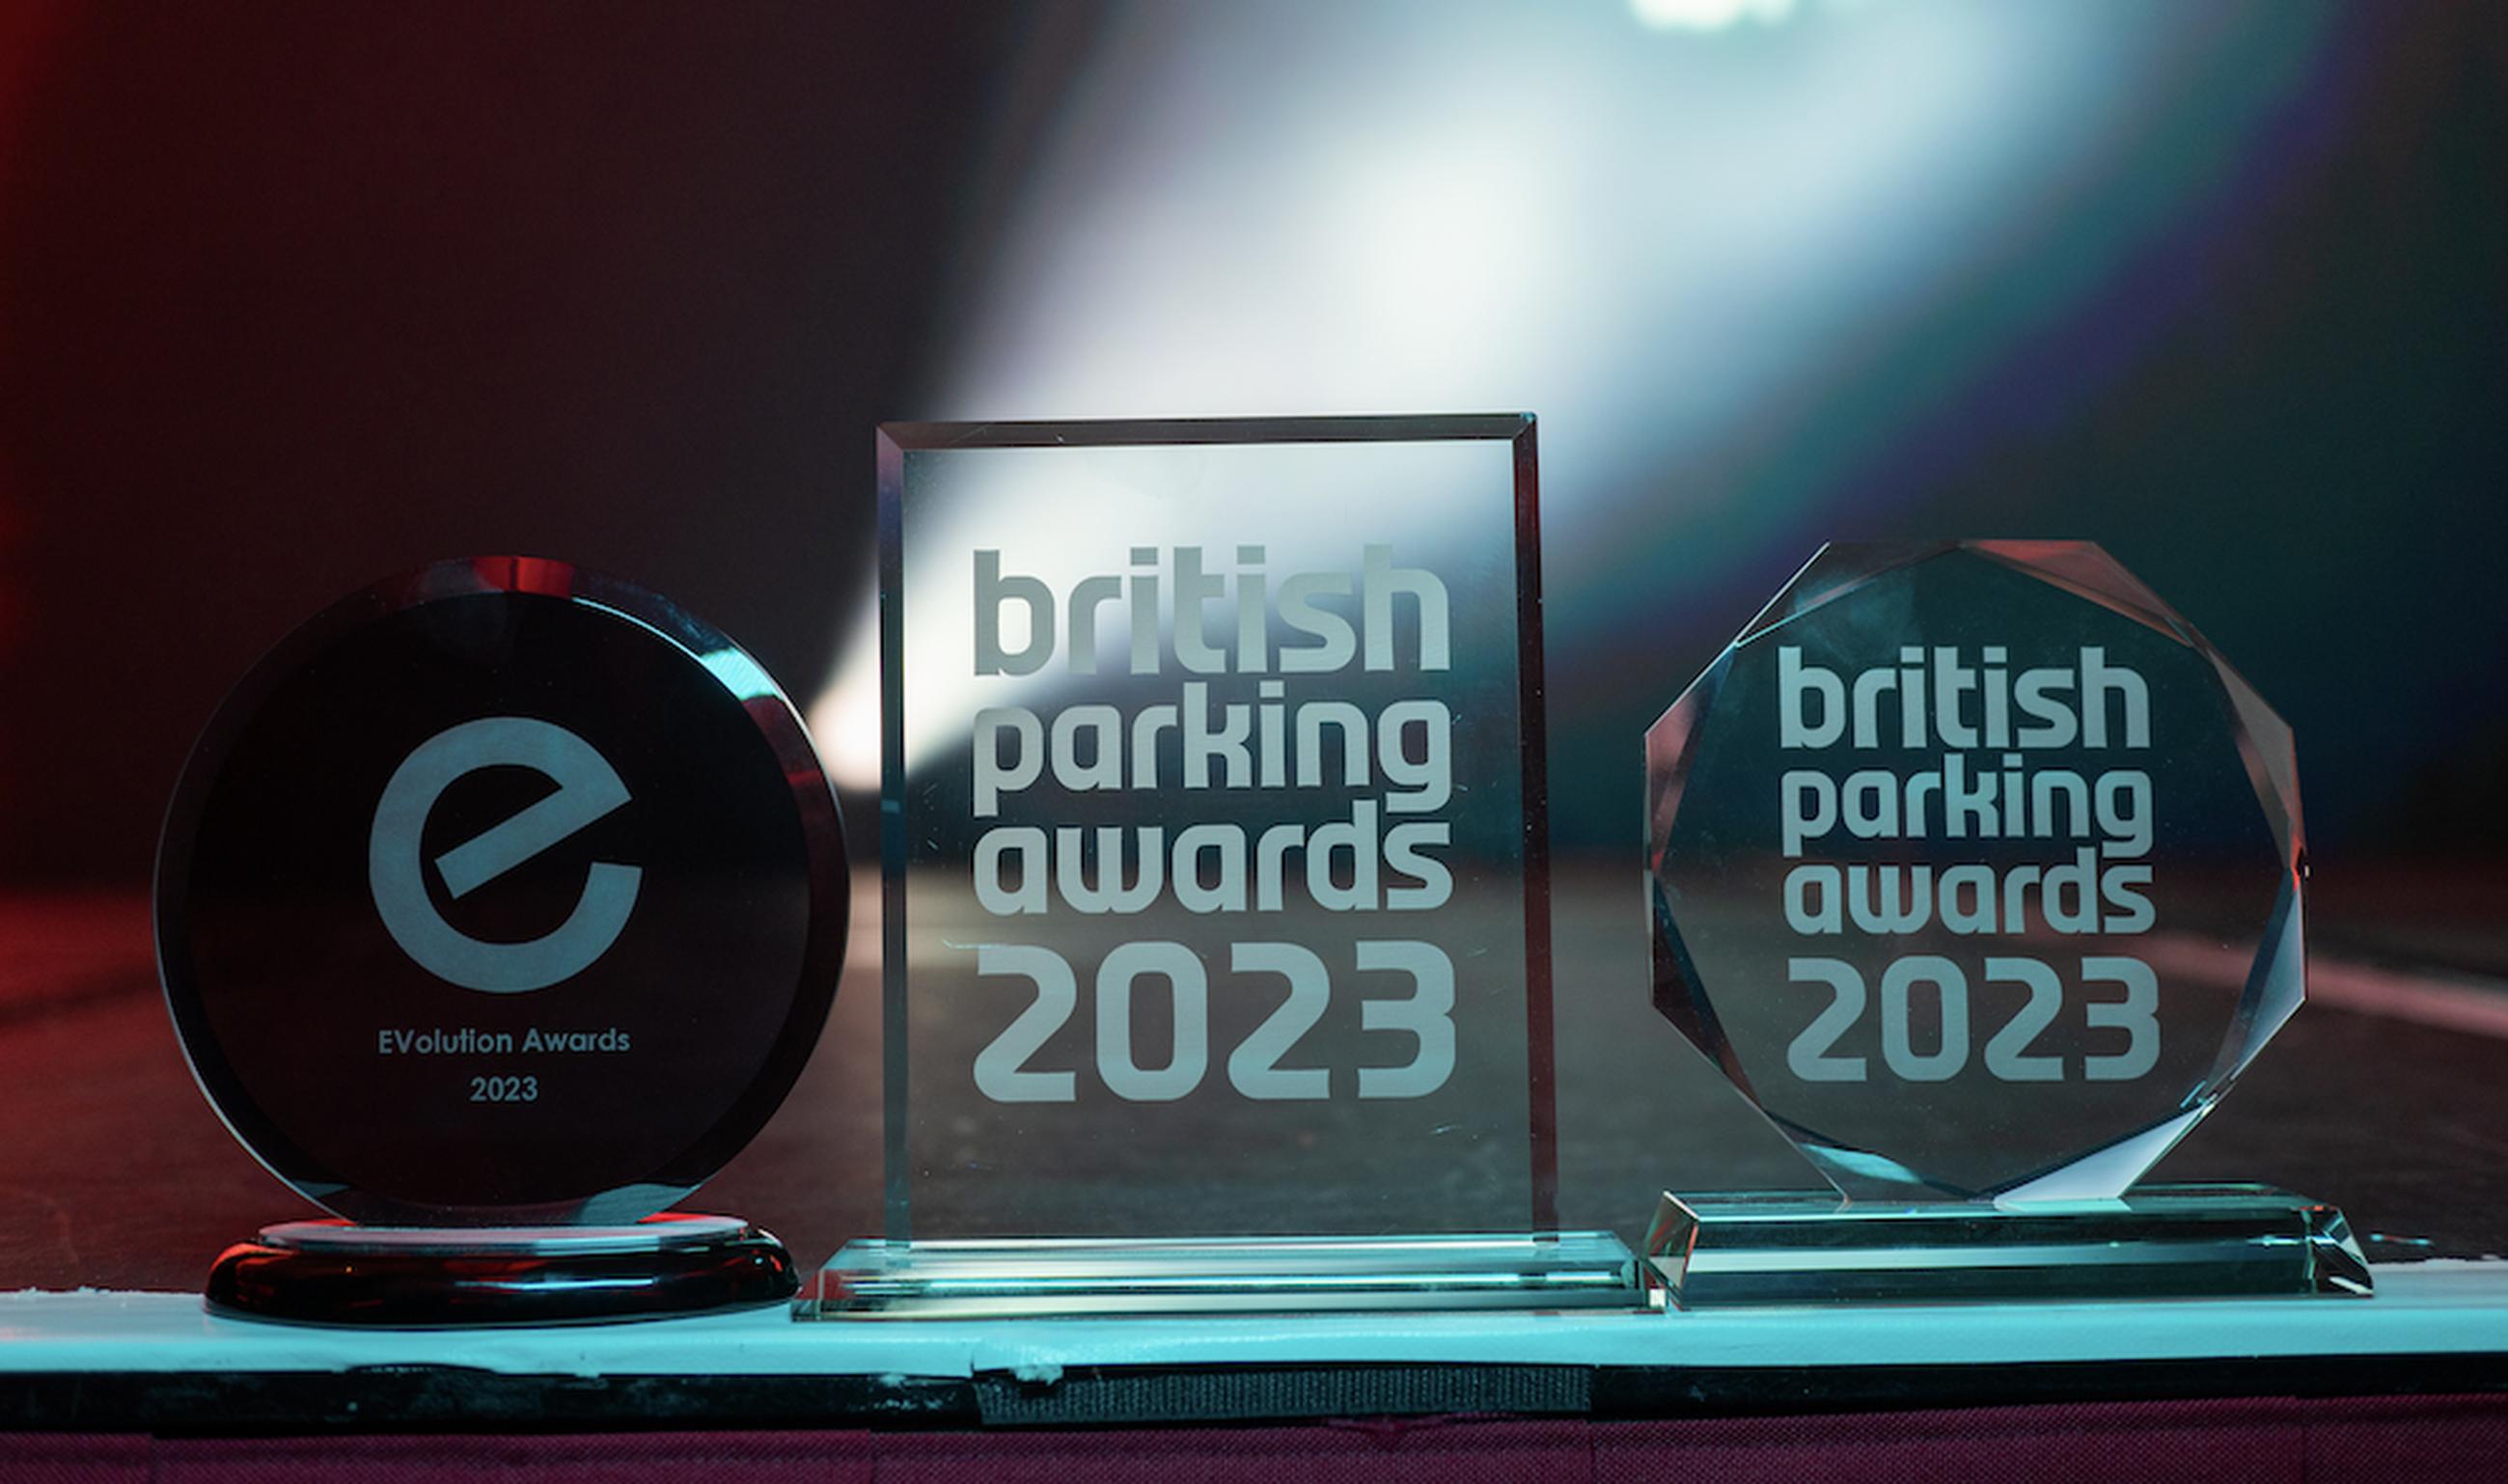 The British Parking Awards and EVolution Awards trophies